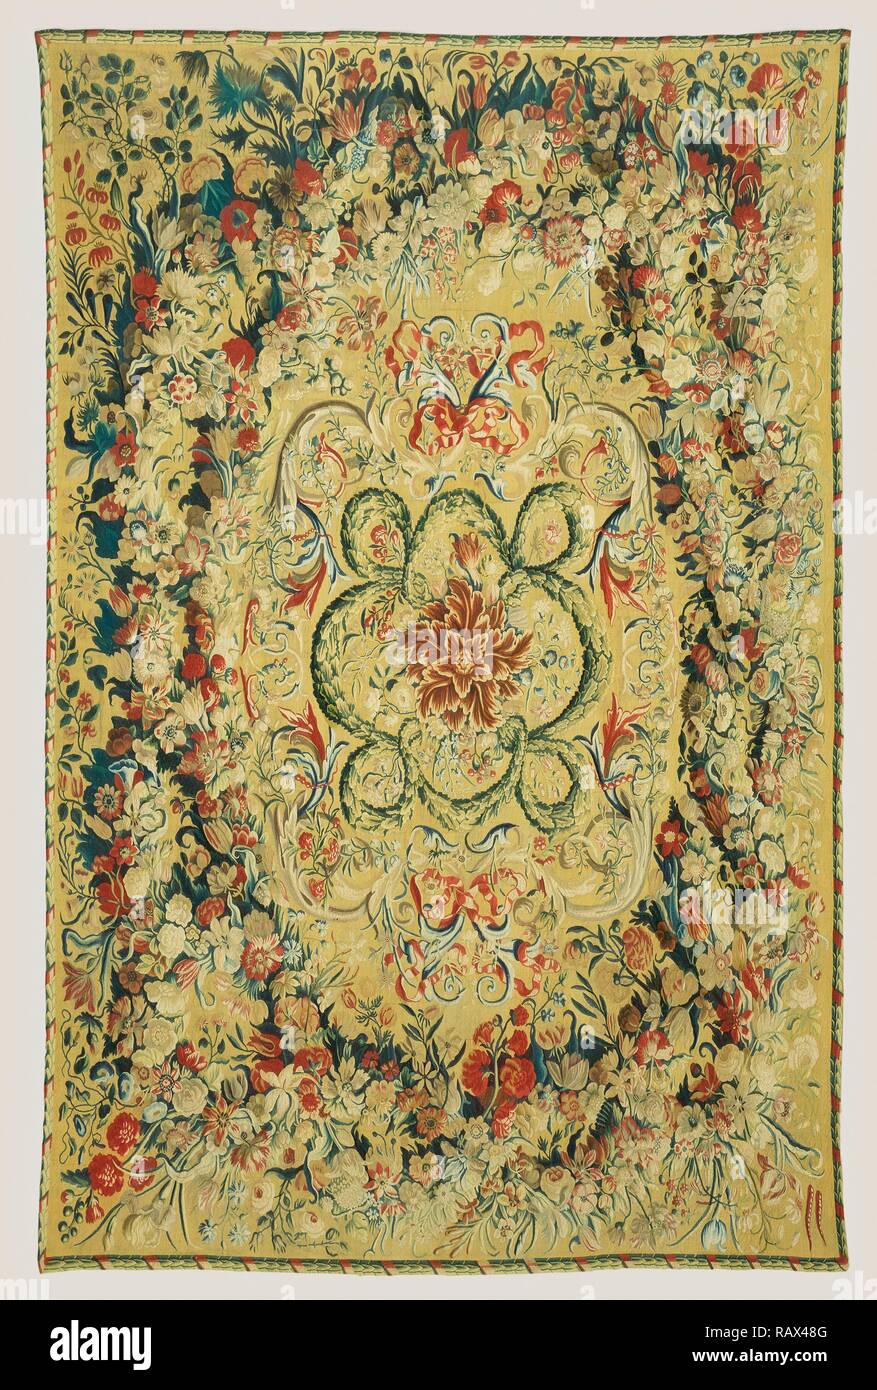 Carpet, Carpet made at the Beauvais Manufactory, French, founded 1664, Unknown, Beauvais, France, Europe, about 1690 reimagined Stock Photo